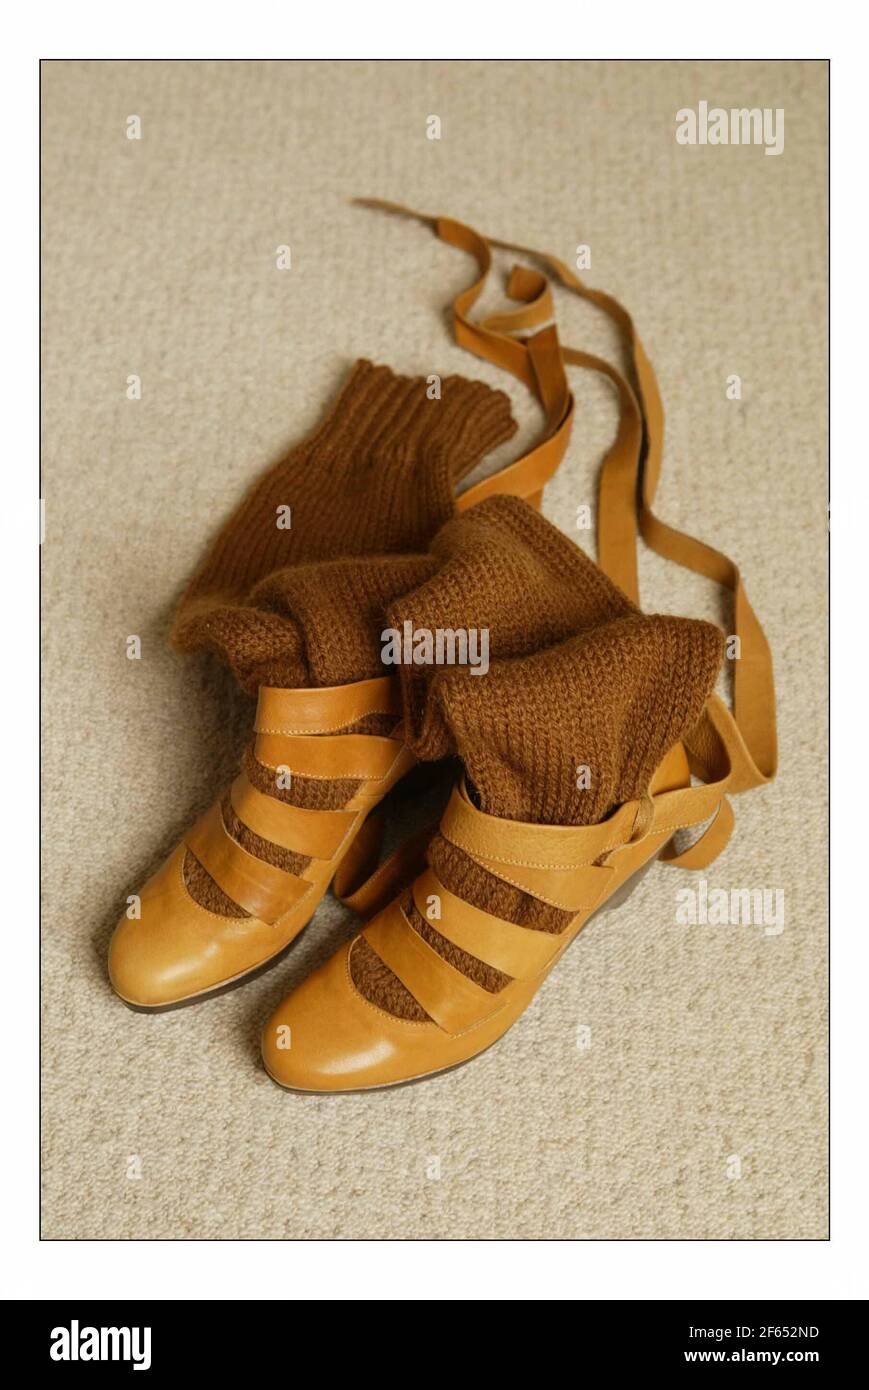 Ethical Shoes Tested by Kate FinneganJana, tan, Terra Plana (brown and knit  long boot) pic David Sandison 13/4/2005 Stock Photo - Alamy